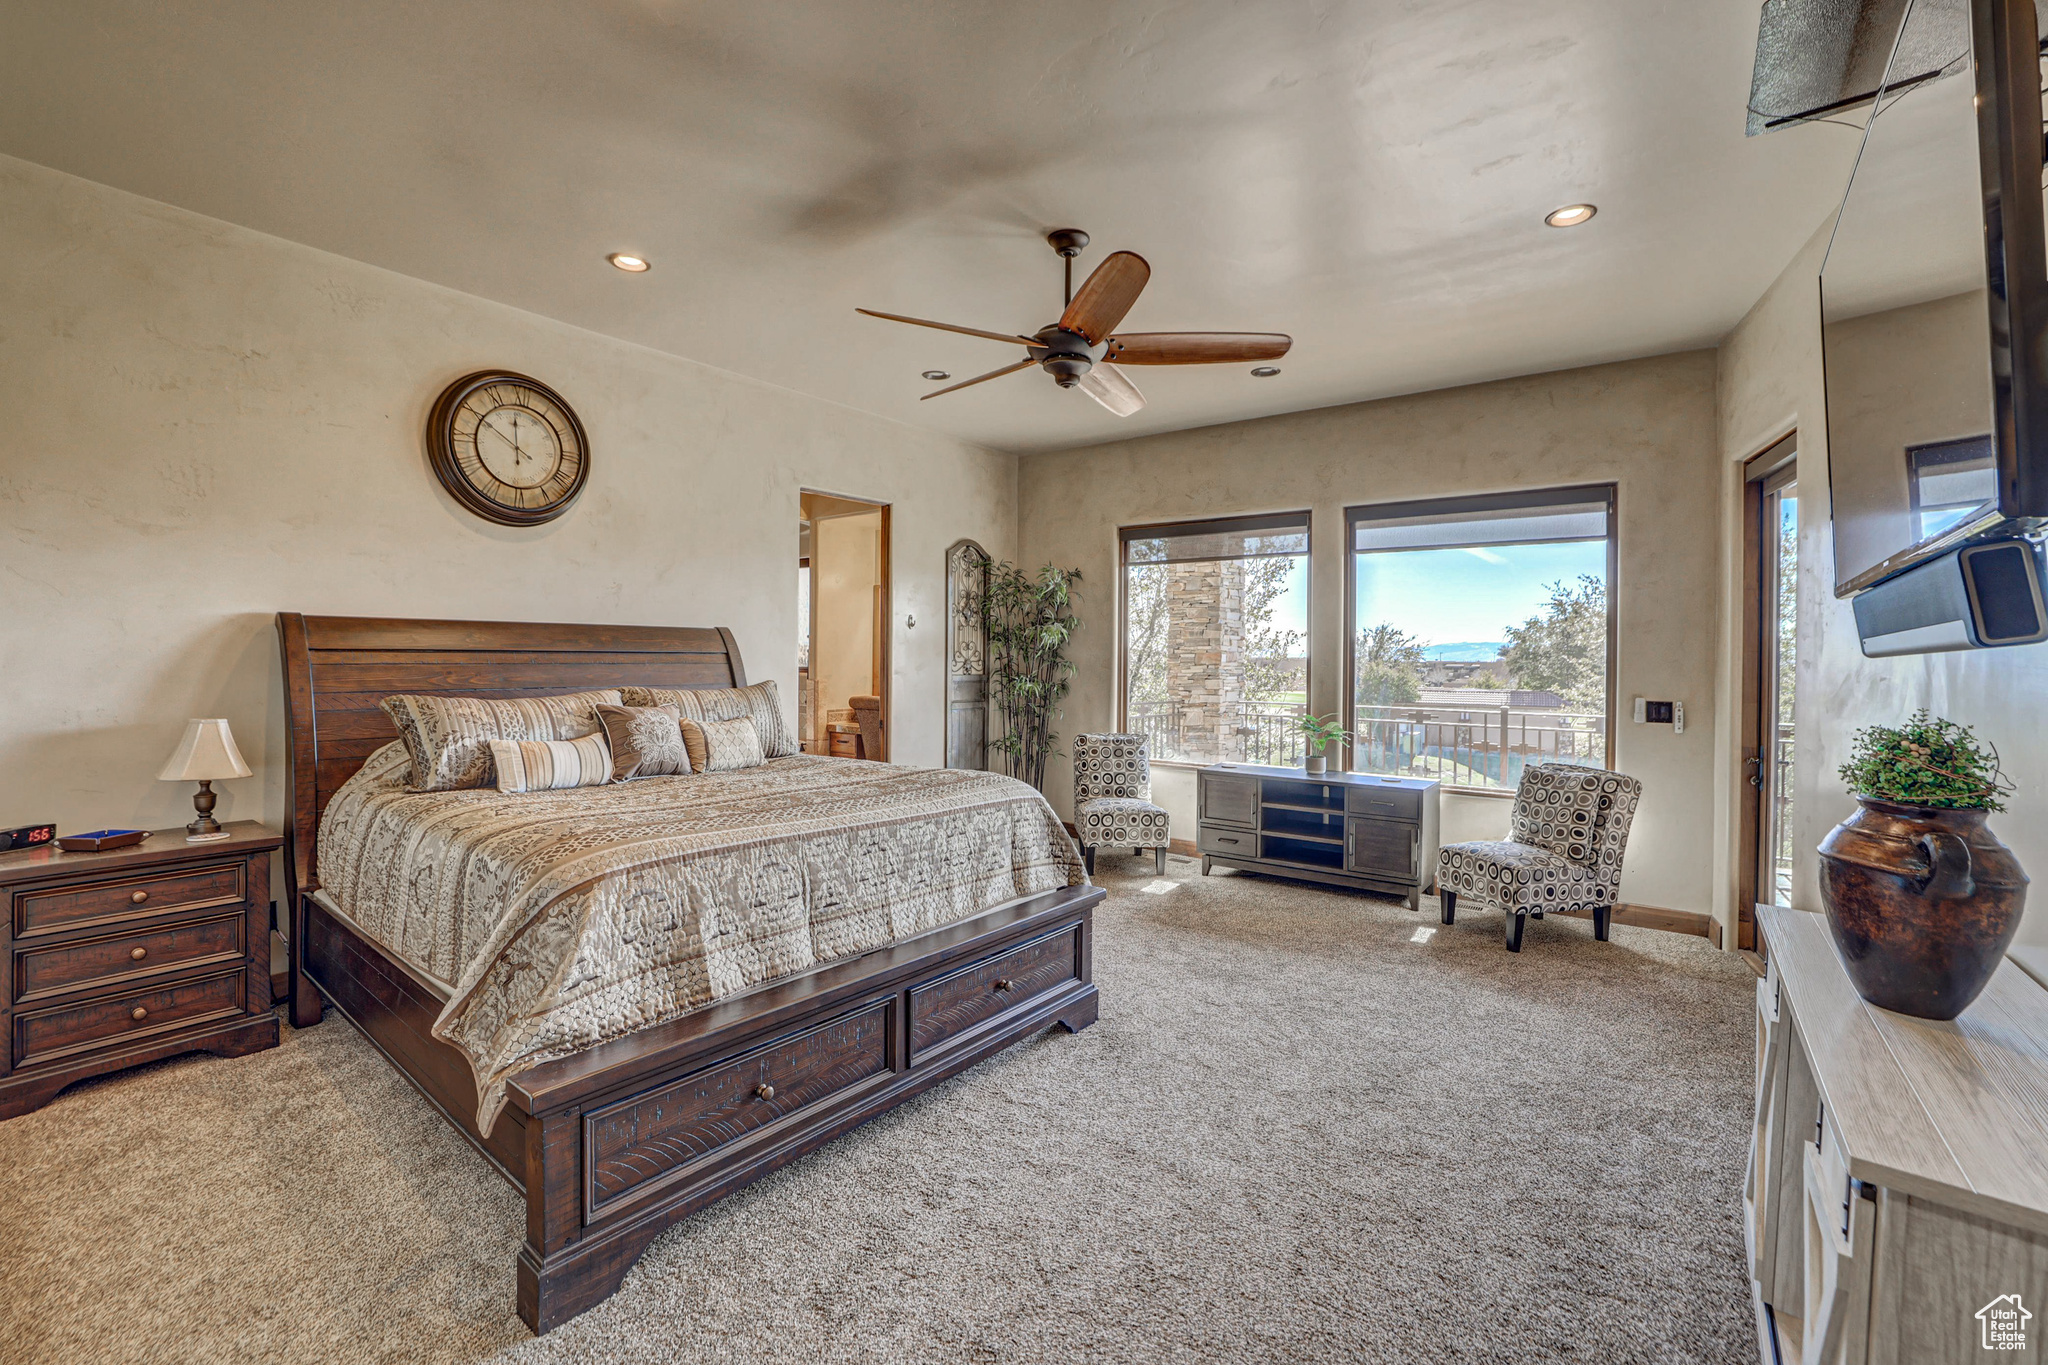 Bedroom featuring access to outside, ceiling fan, and light colored carpet